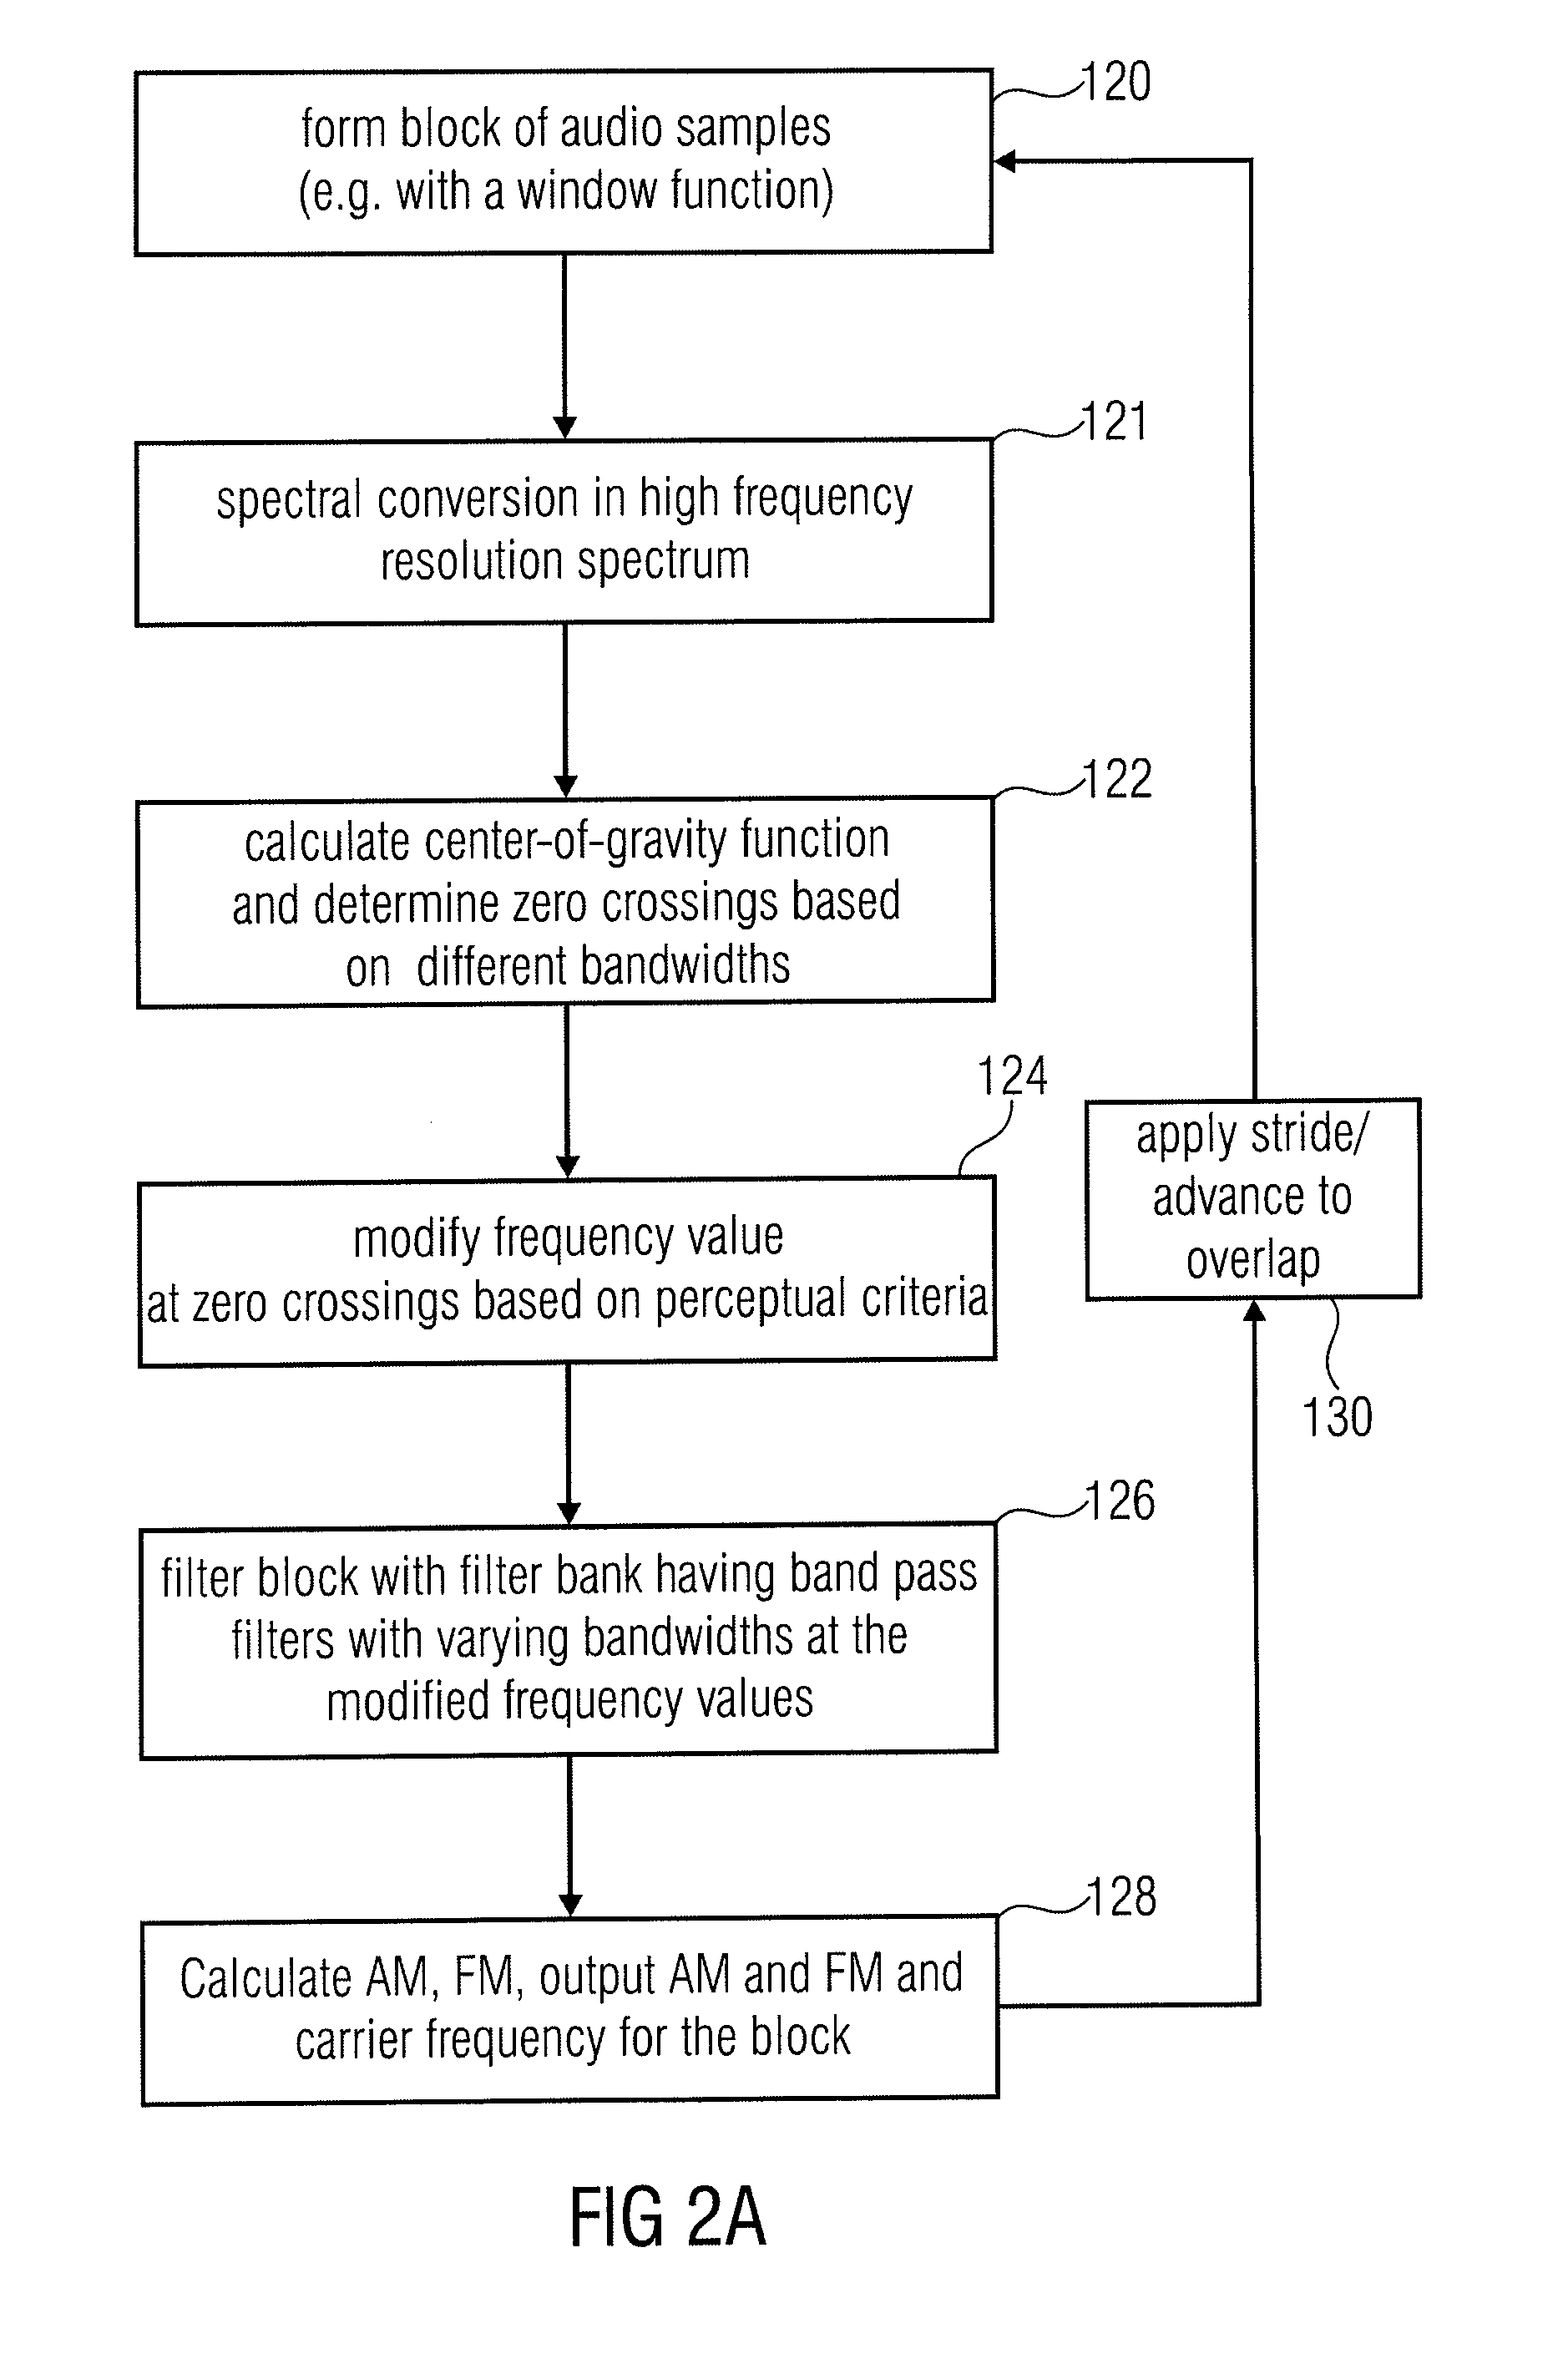 Apparatus and method for converting an audiosignal into a parameterized representation, apparatus and method for modifying a parameterized representation, apparatus and method for synthesizing a parameterized representation of an audio signal